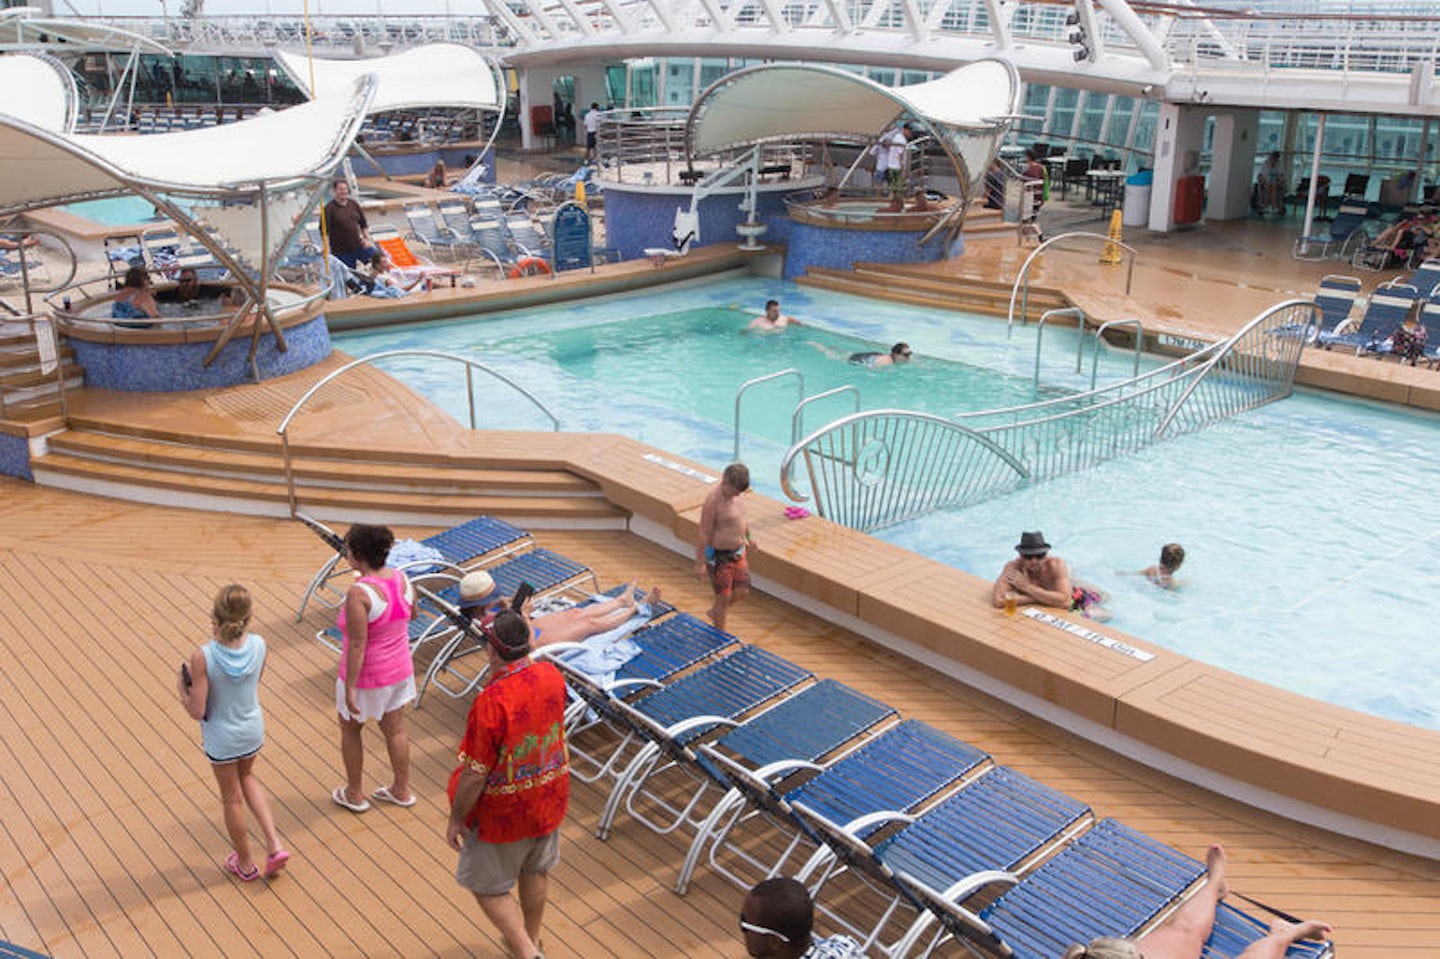 The Main Pool on Enchantment of the Seas